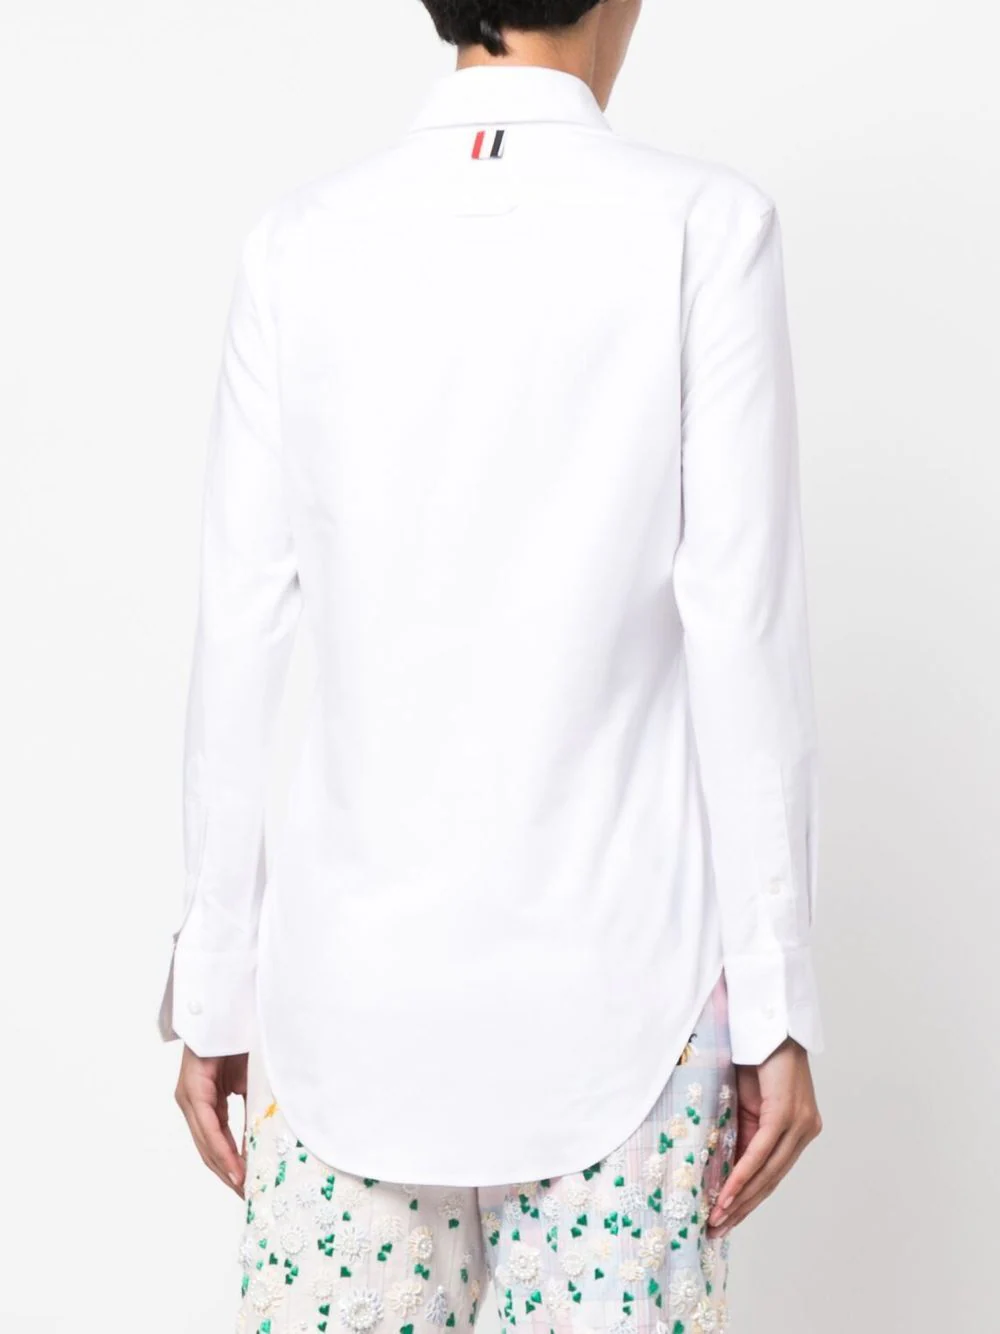 THOM BROWNE WOMEN CLASSIC POINT COLLAR SHIRT W/ SEQUIN FLOWERS AND SATIN STITCH BEE EMBROIDERY ON OXFORD